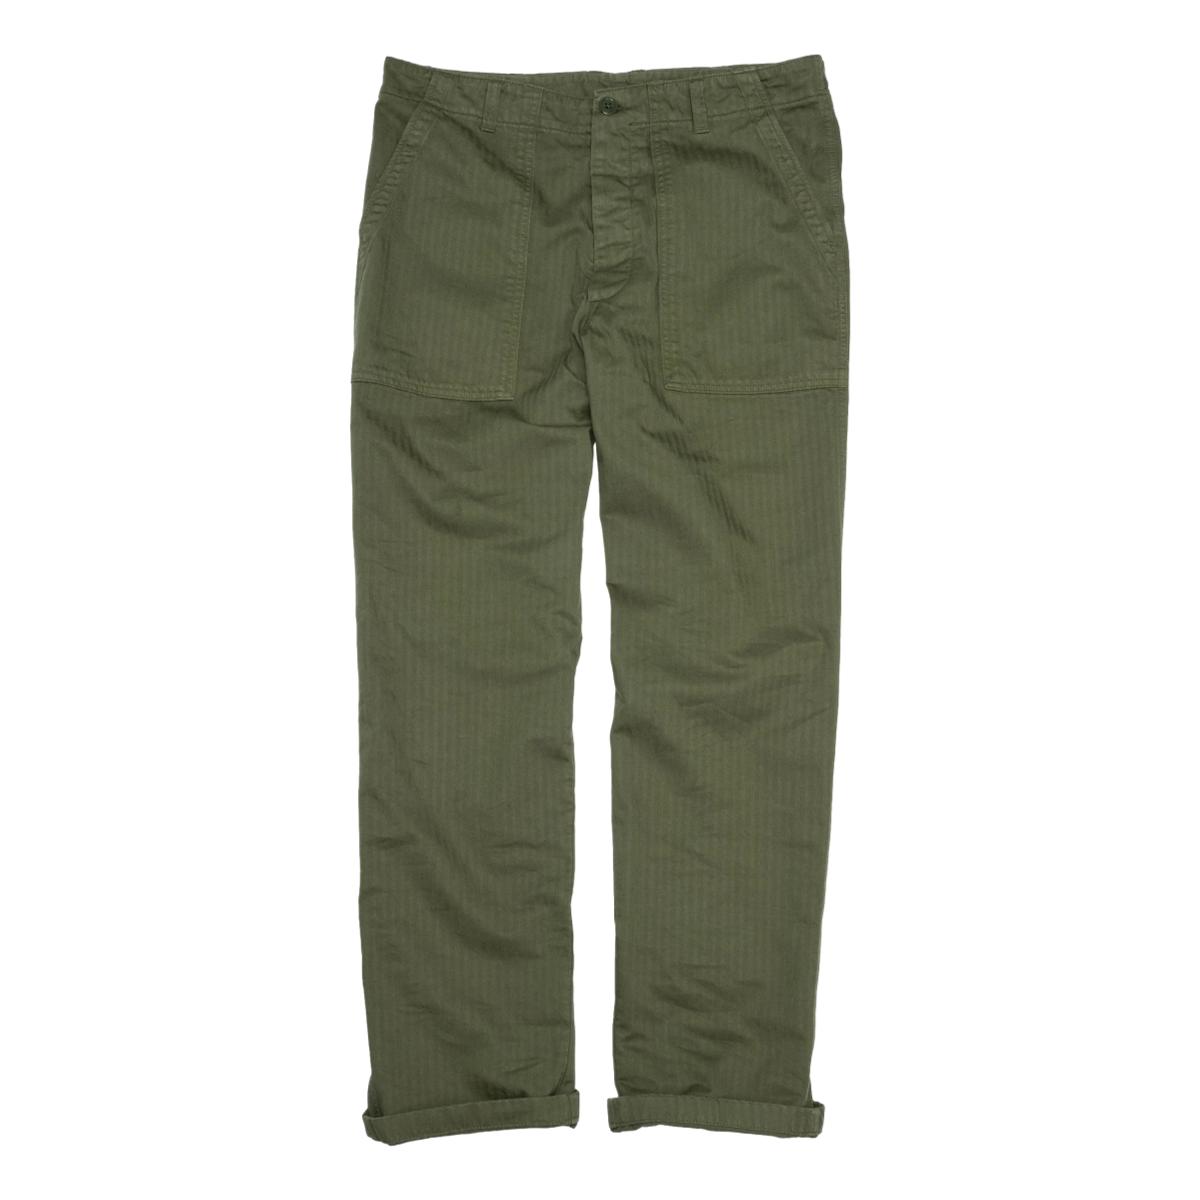 Garment Dyed Utility Pant in Olive Drab - Fatigue Pant